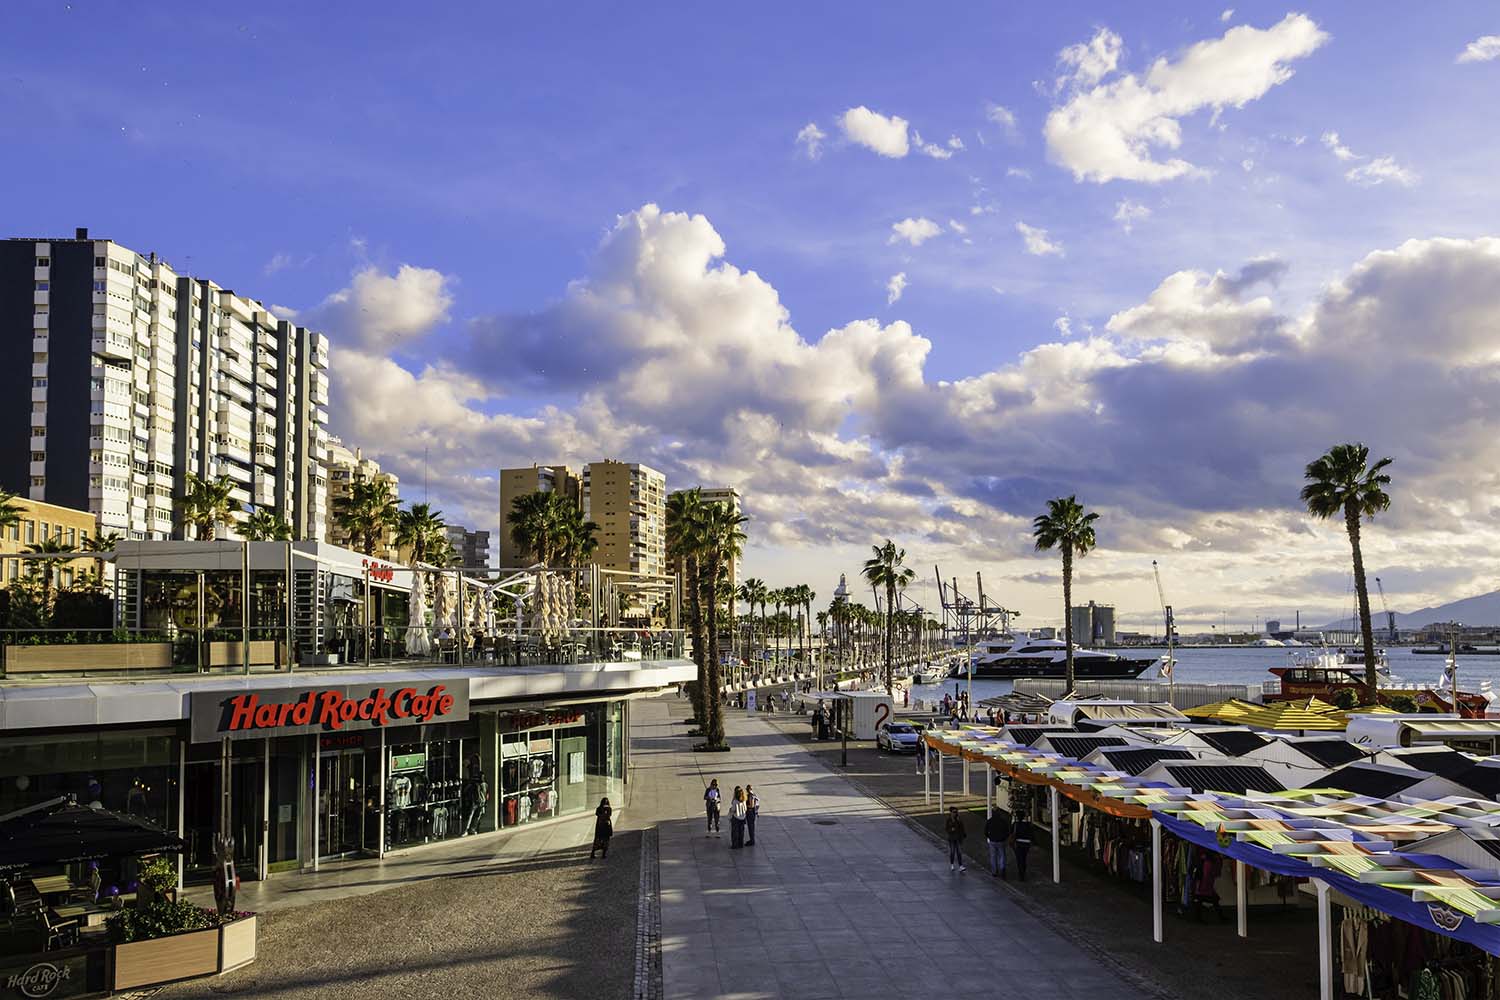 People strolling at the Muelle Uno in Malaga, the tourist harbor but also a commercial area and a place for meeting. Among the numerous cafes and restaurants, people can relax at the Hard Rock Café, with food and music.